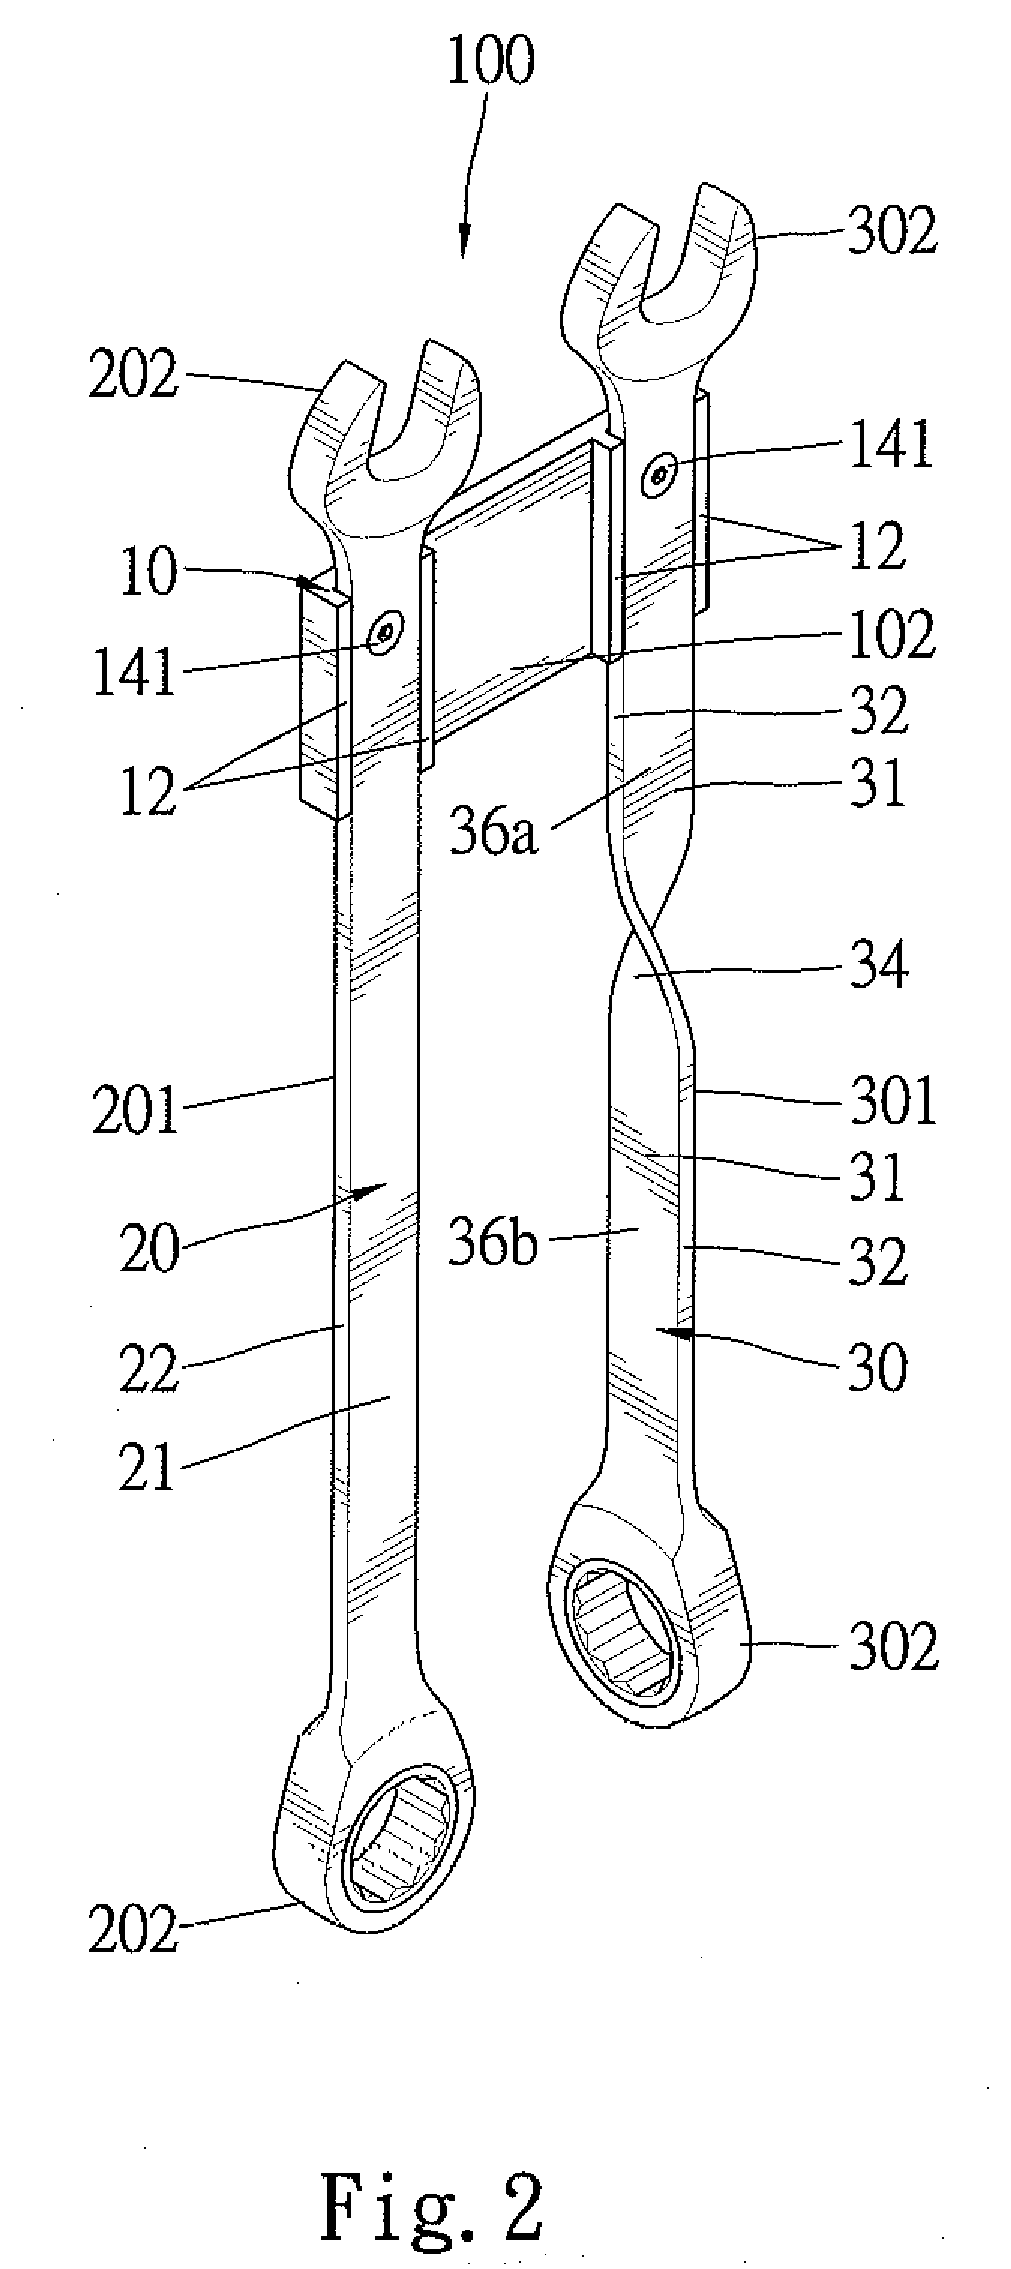 Display Rack Assembly for Wrenches with Different Handles